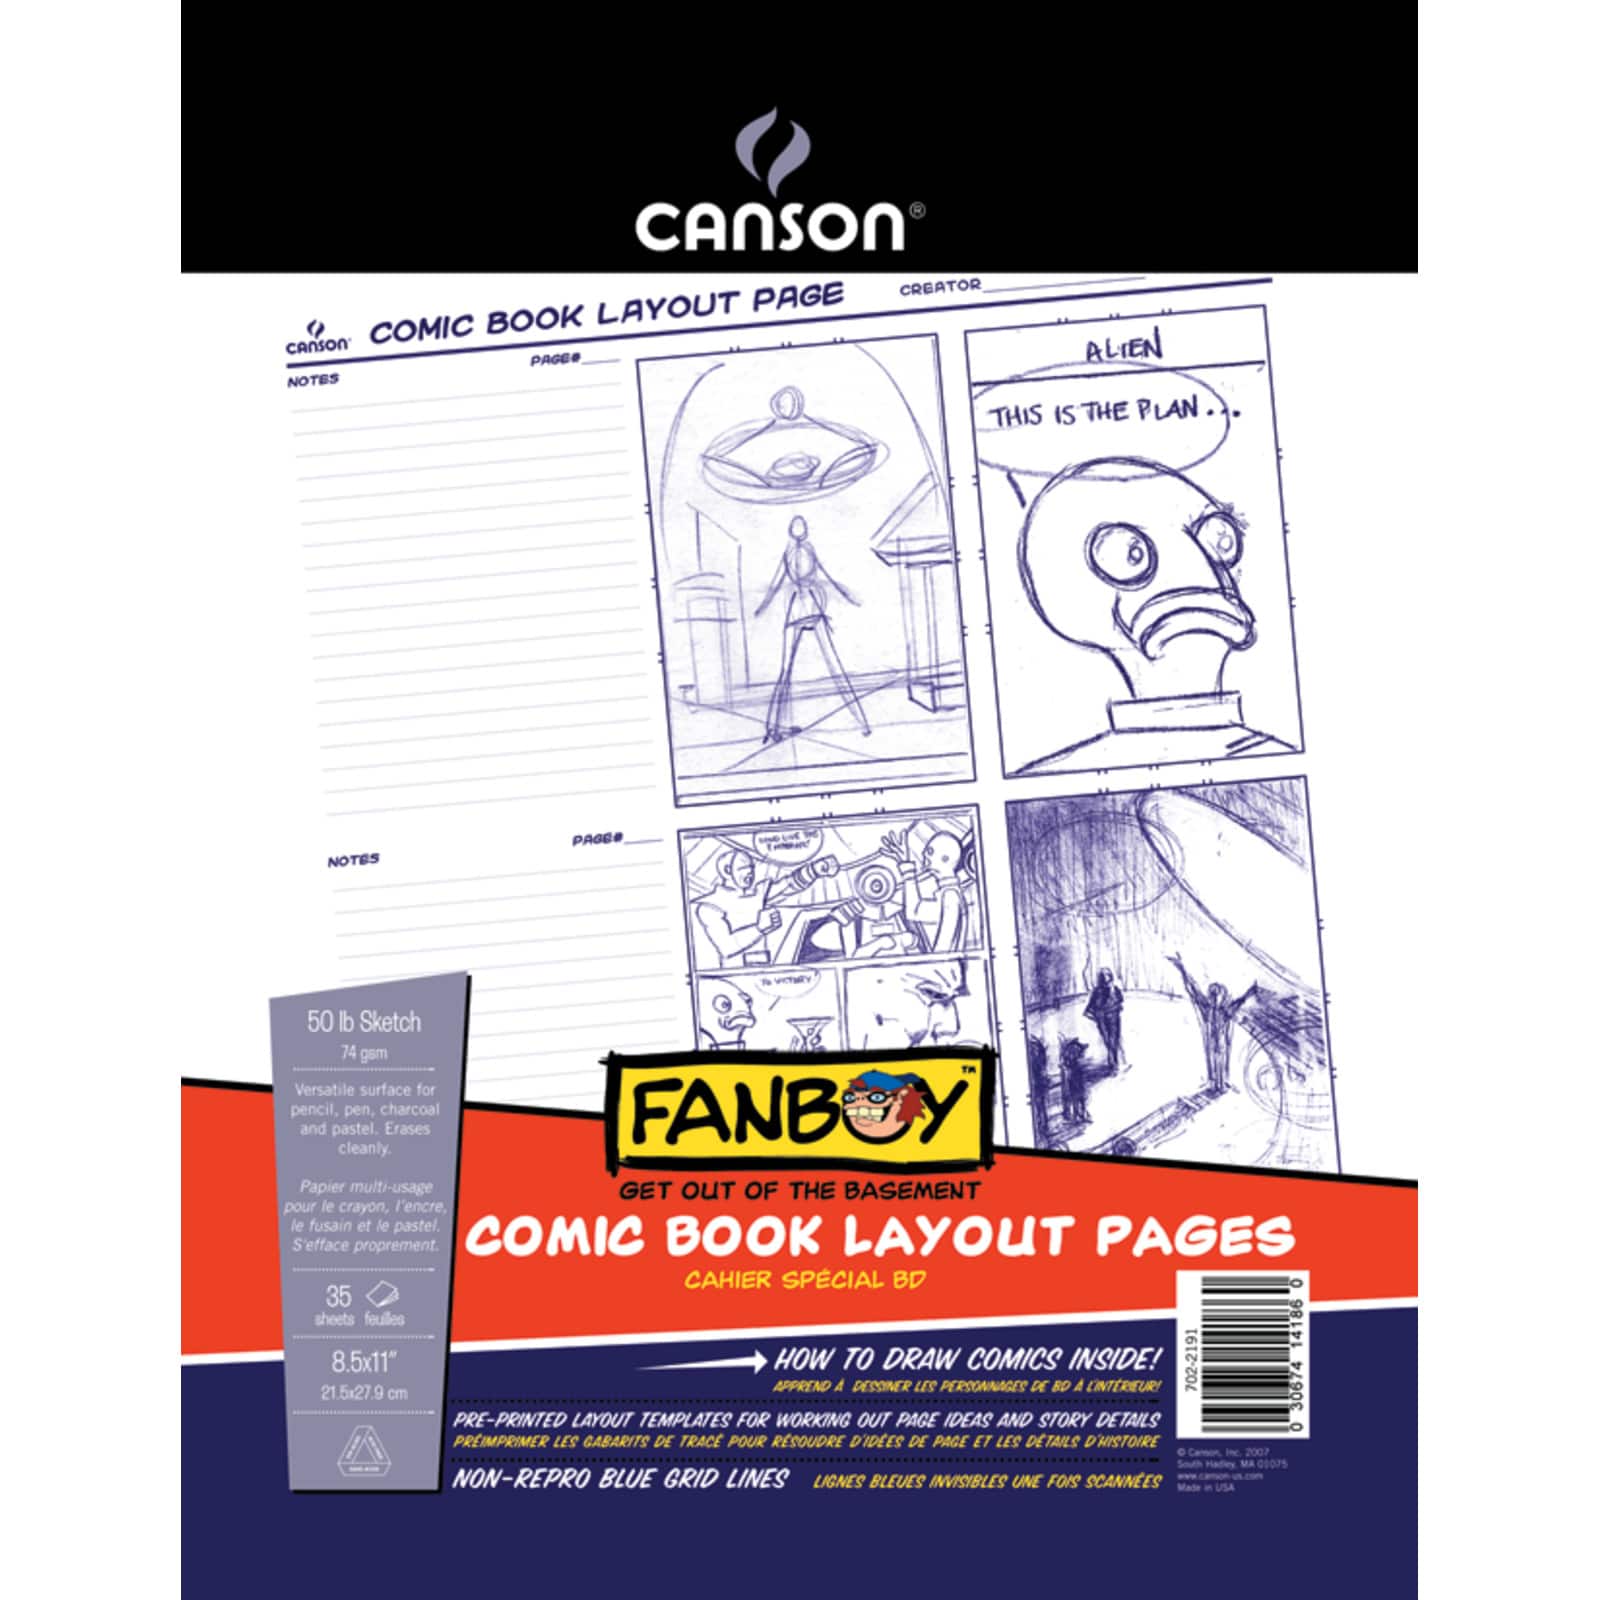 New Create Your Own Comic Book Kit Project book stickers pencil Markers